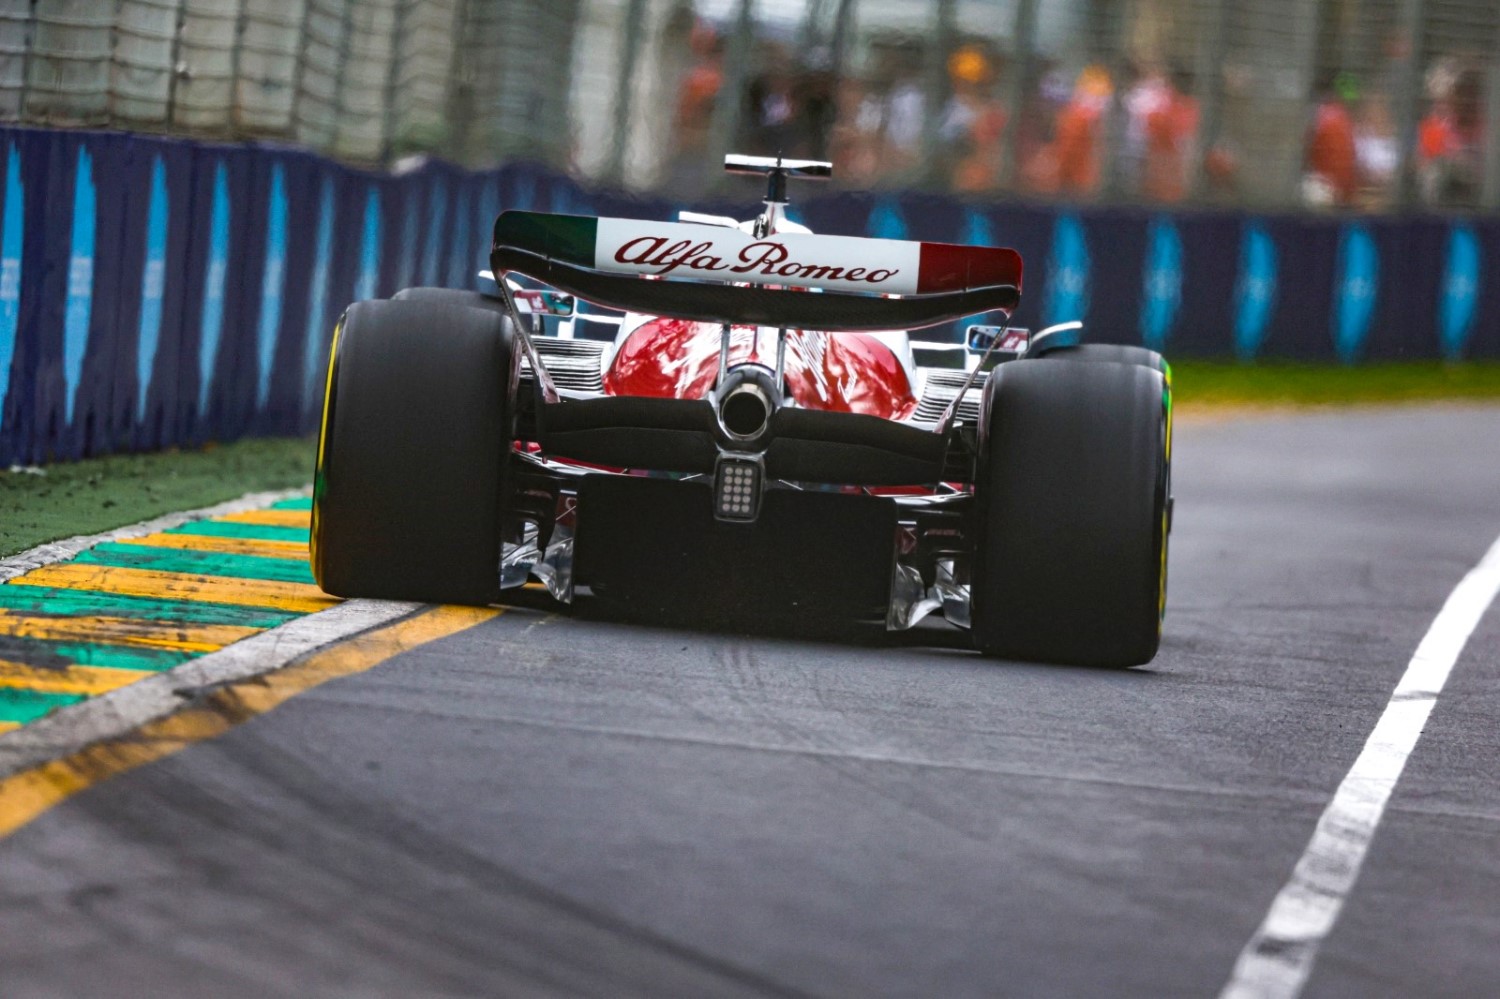 Rumor: Alfa Romeo to move from Sauber F1 to Haas F1 in 2024